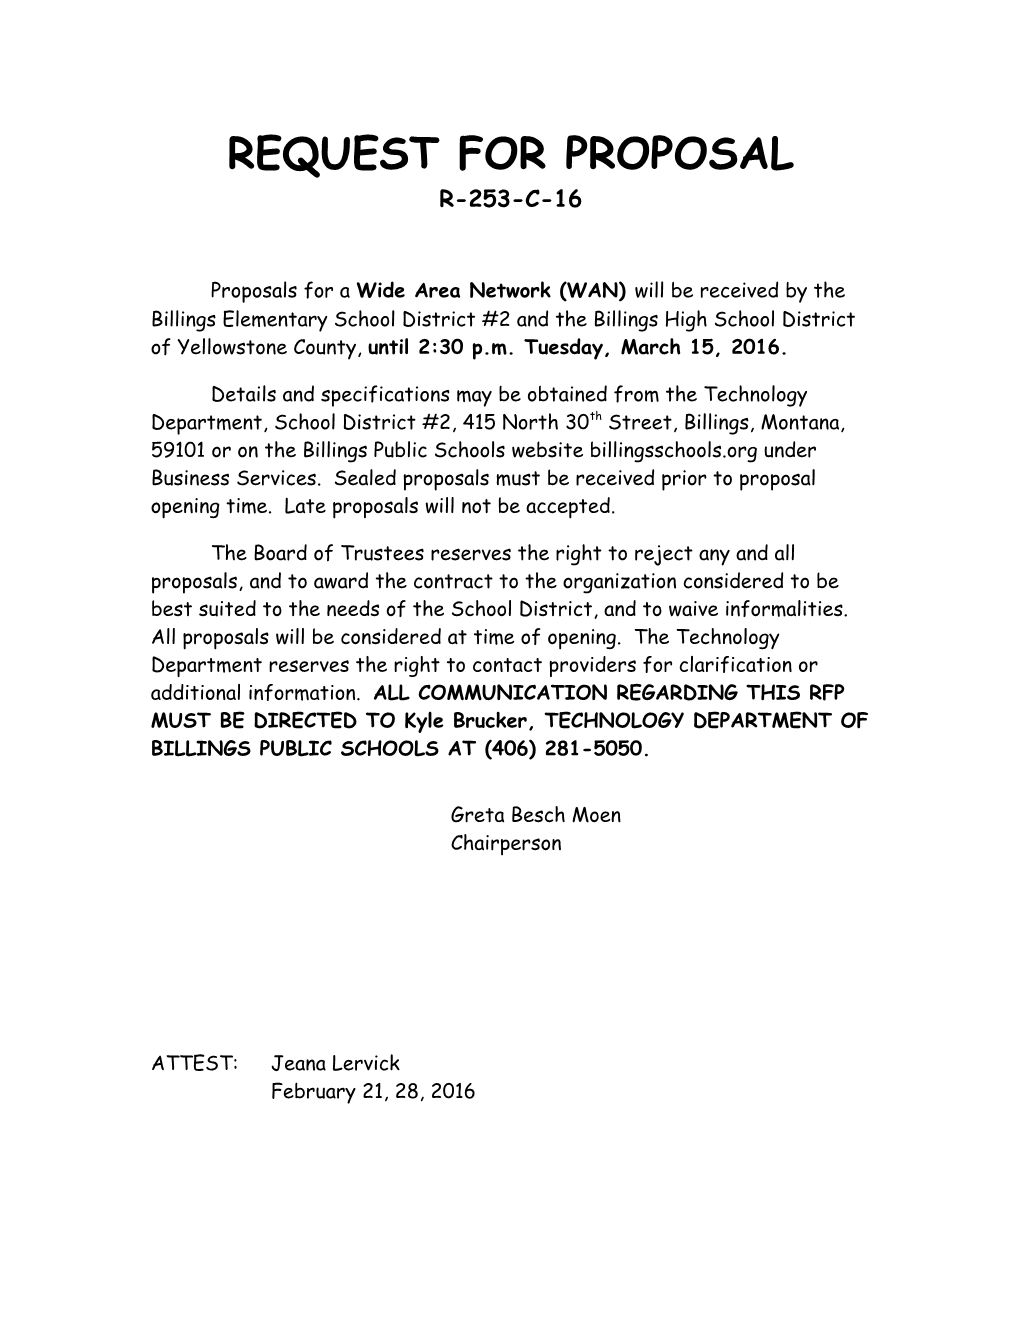 Request for Proposal s69